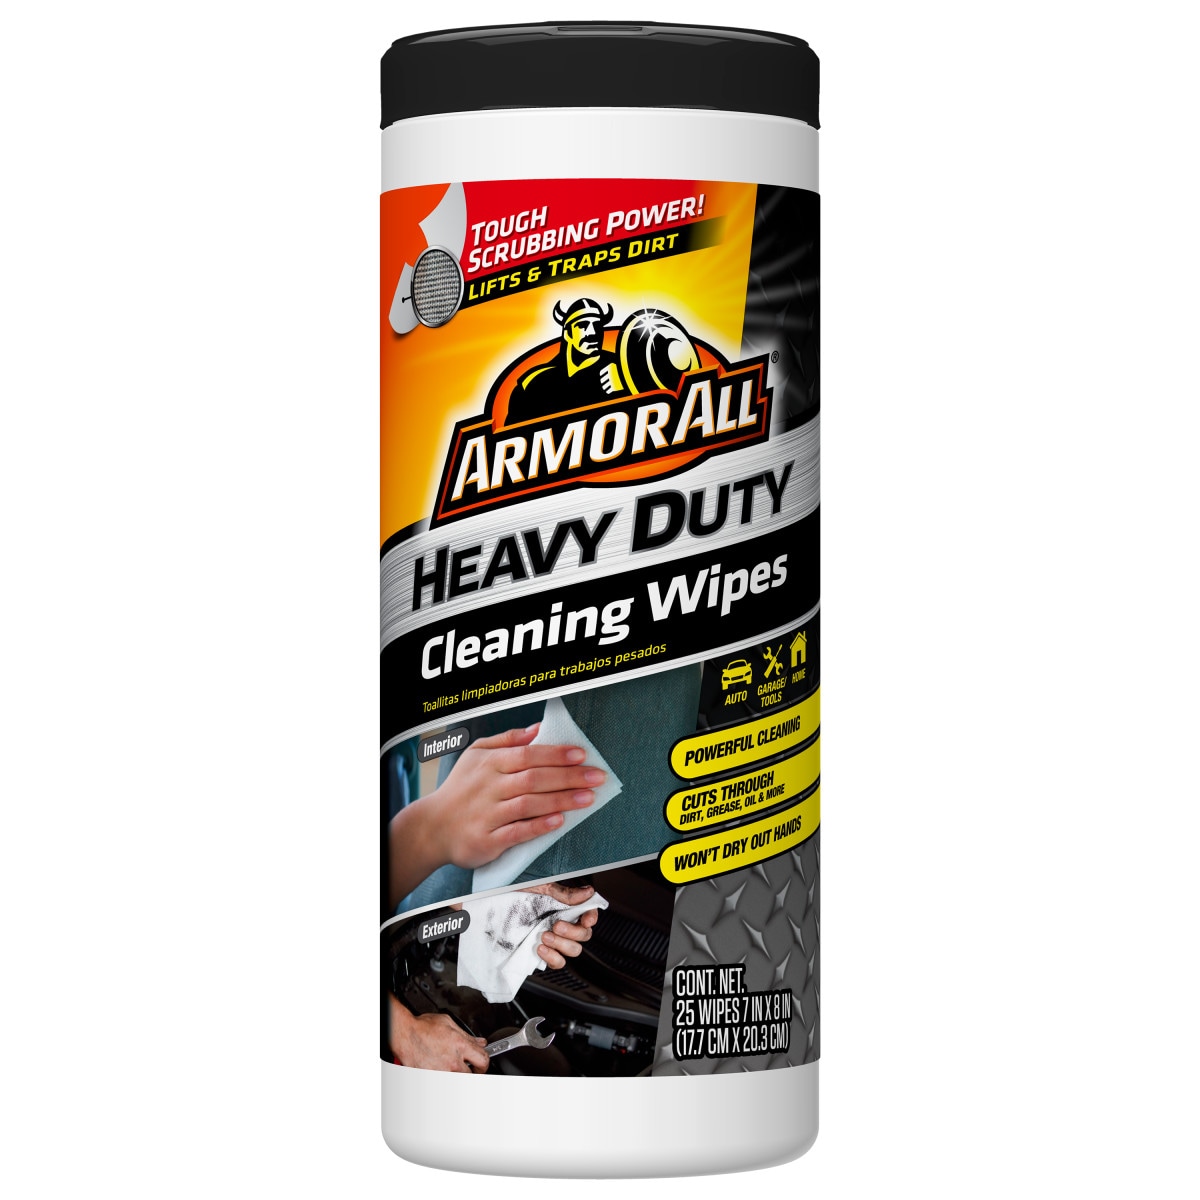 Armor All Cleaning Wipes, Heavy Duty - 25 wipes